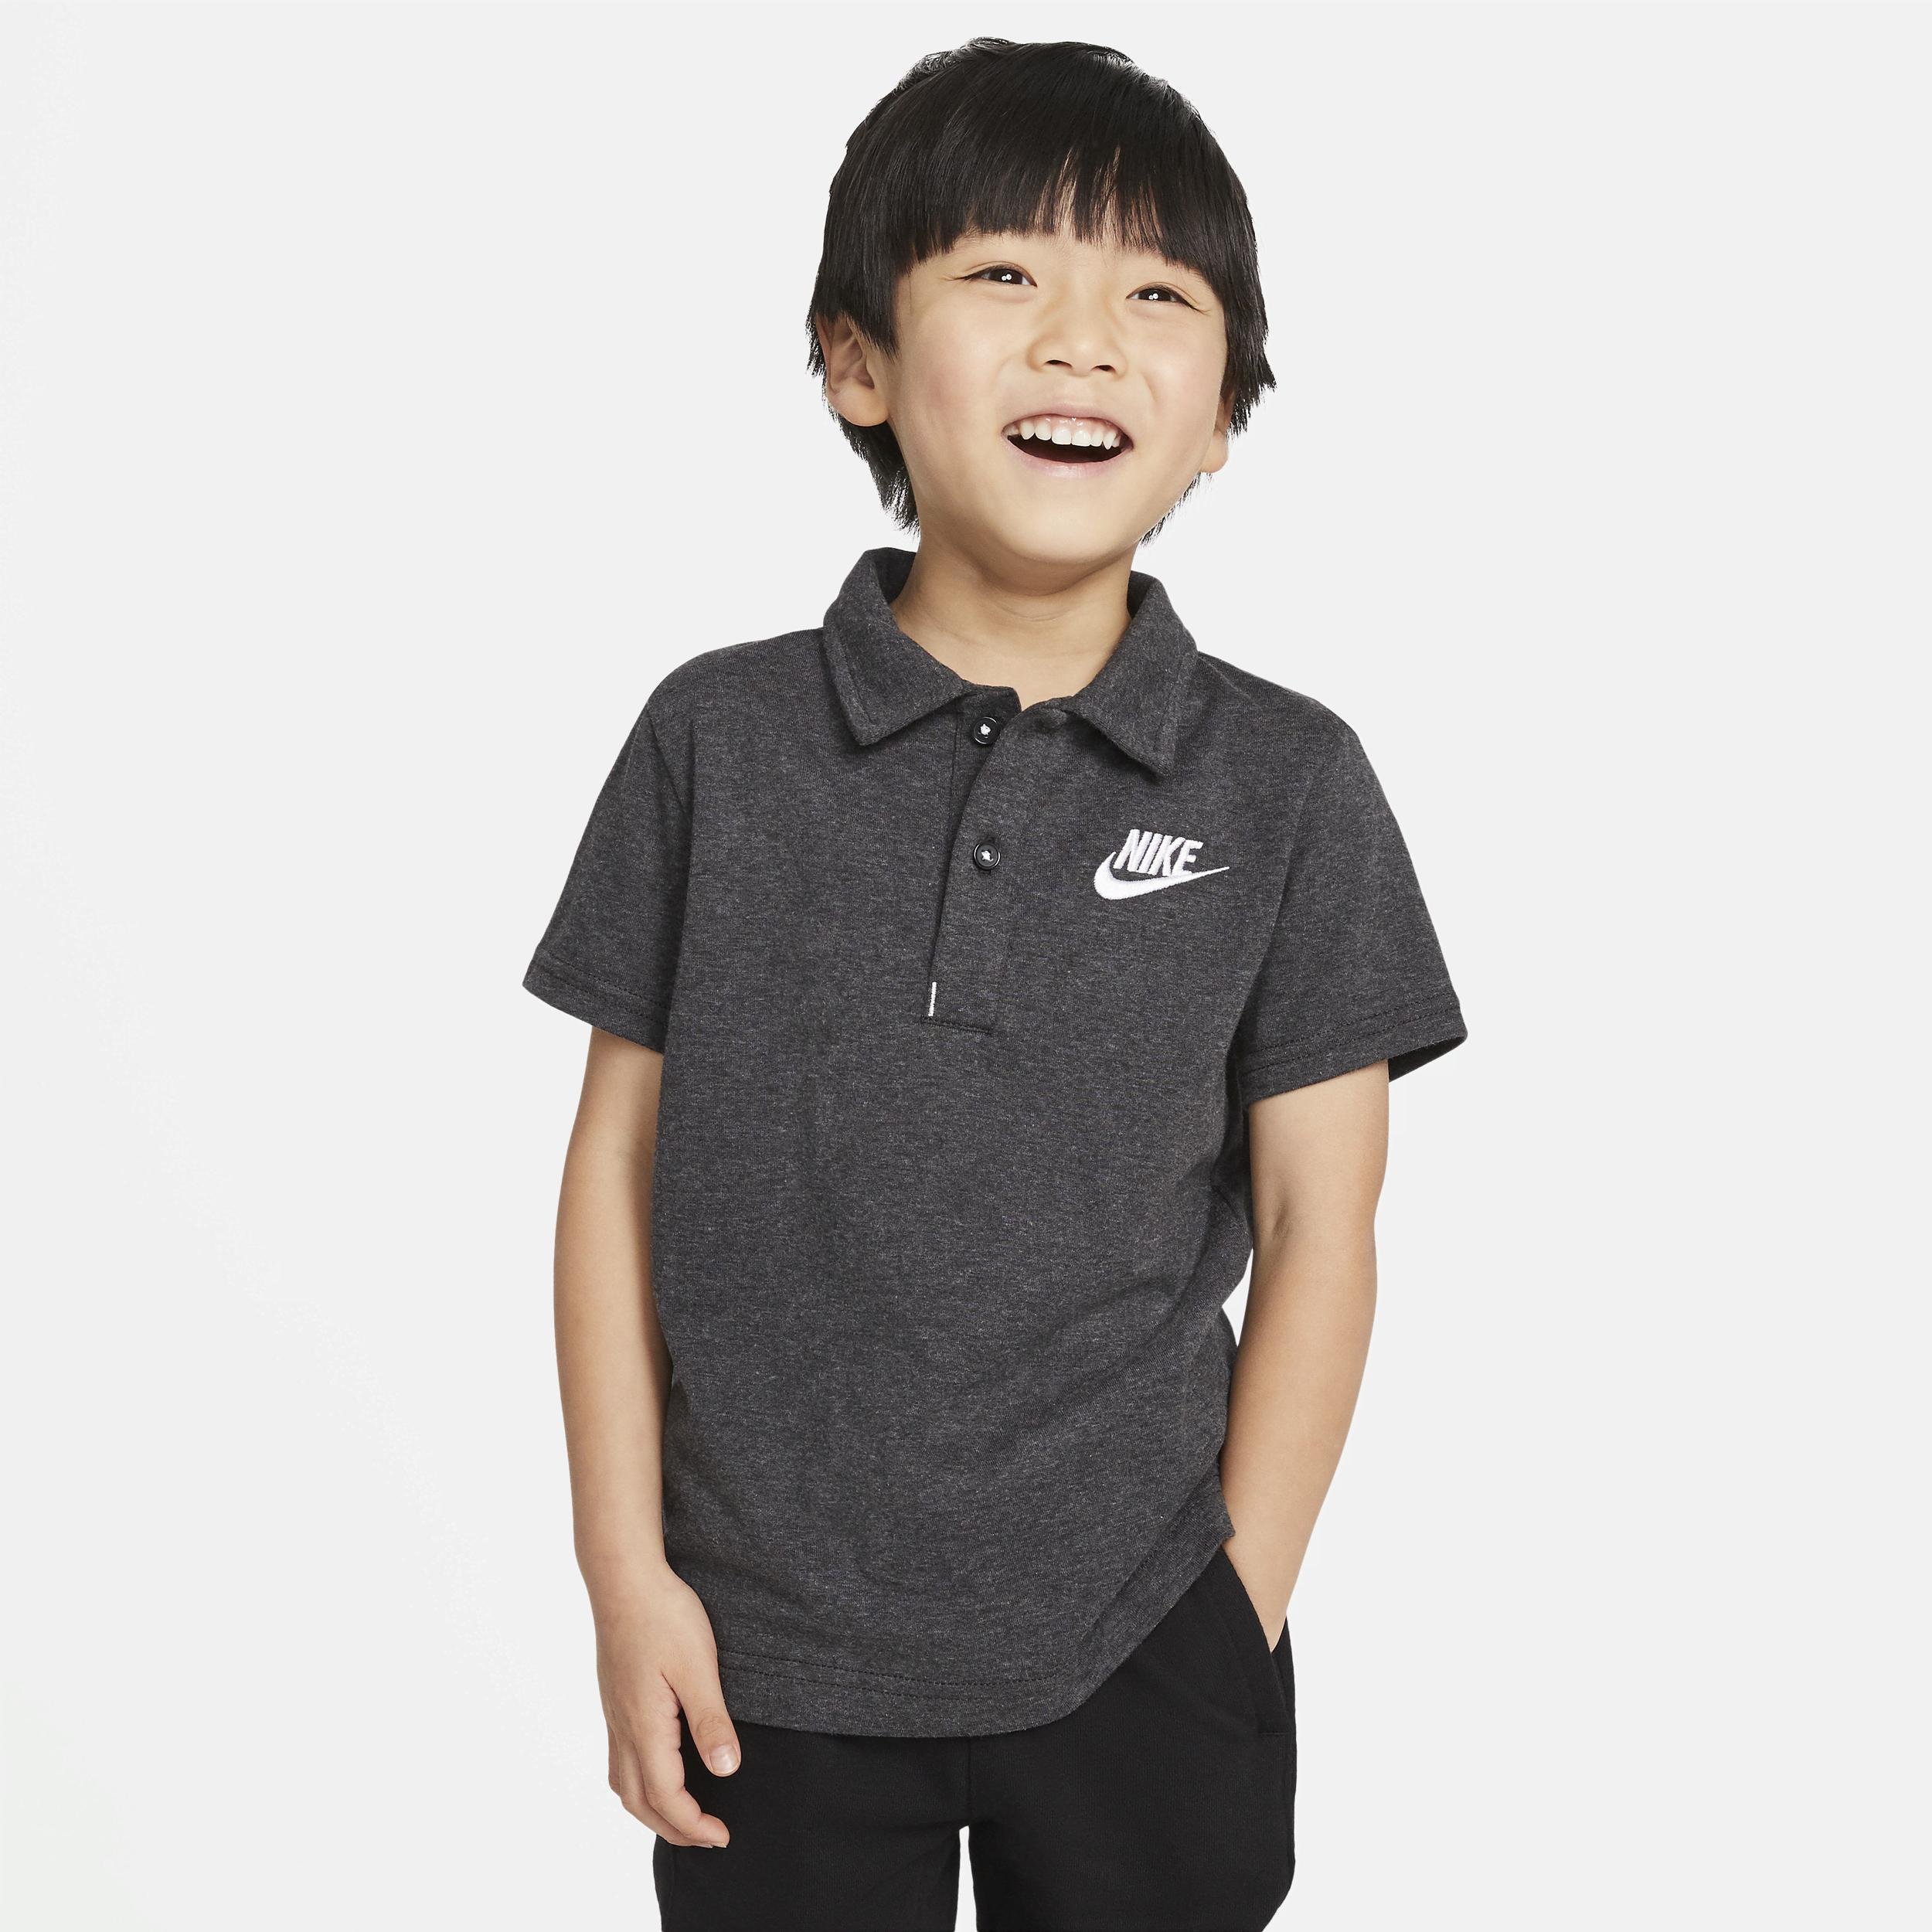 Nike Dri-FIT Toddler Polo Top by NIKE